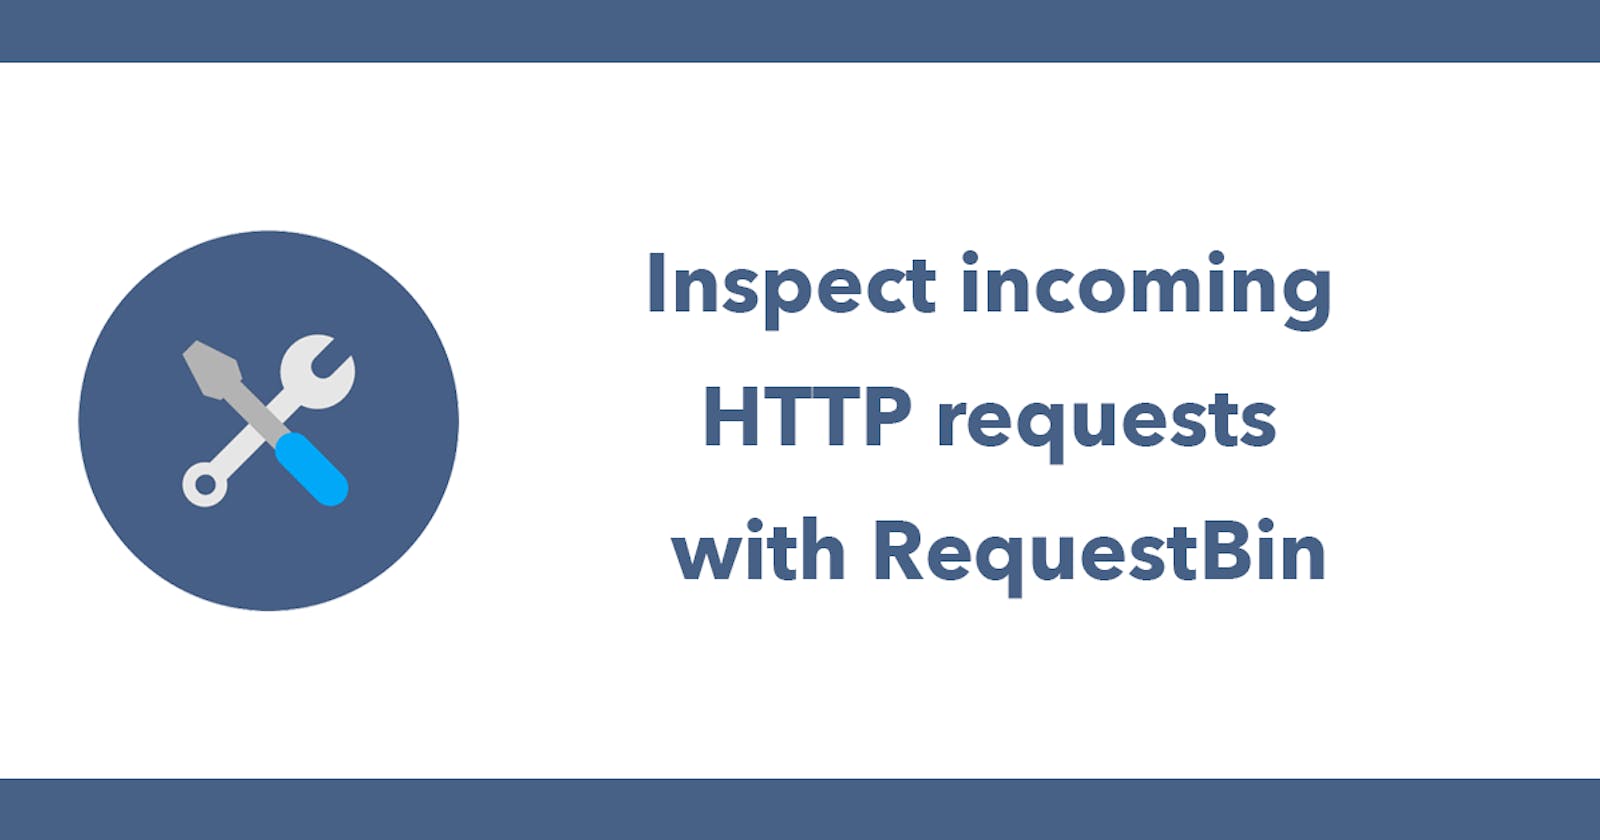 Inspect incoming HTTP requests with RequestBin